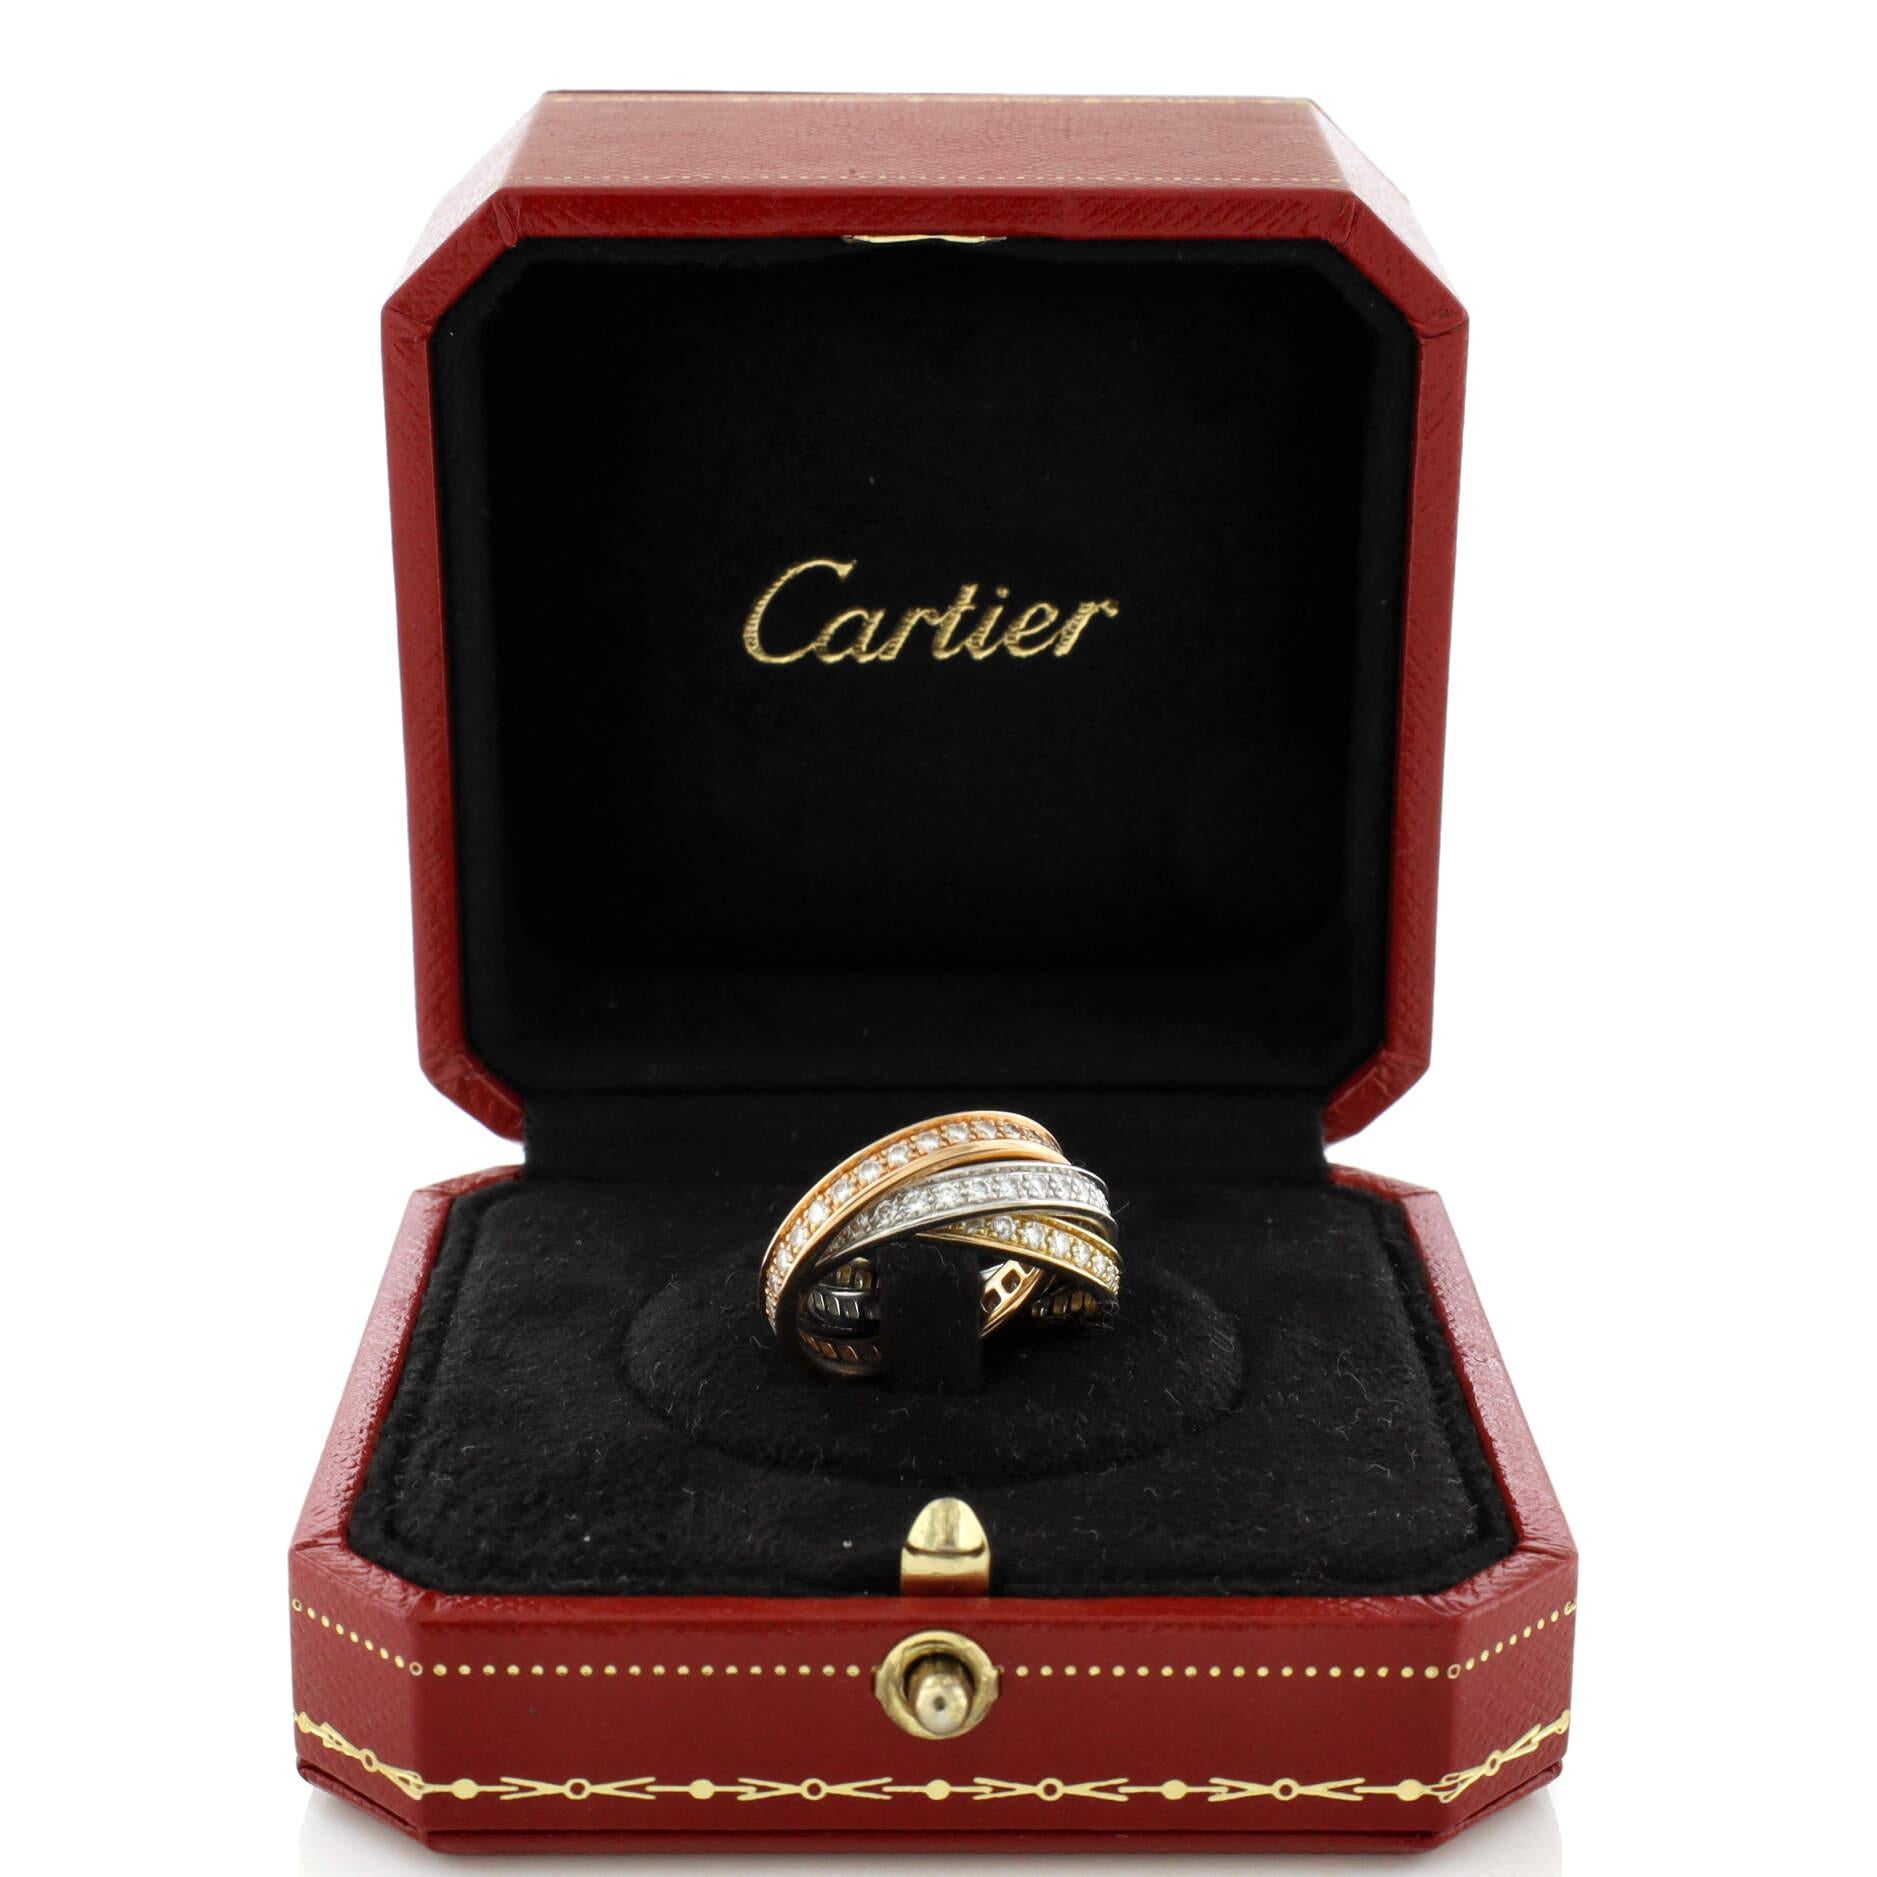 Condition: Very good. Moderate wear throughout.
Accessories: No Accessories
Measurements: Size: 6 - 52, Width: 3.5 mm
Designer: Cartier
Model: Trinity Ring 18K Tricolor Gold with Diamonds
Exterior Color: Tricolor Gold
Item Number: 221254/7